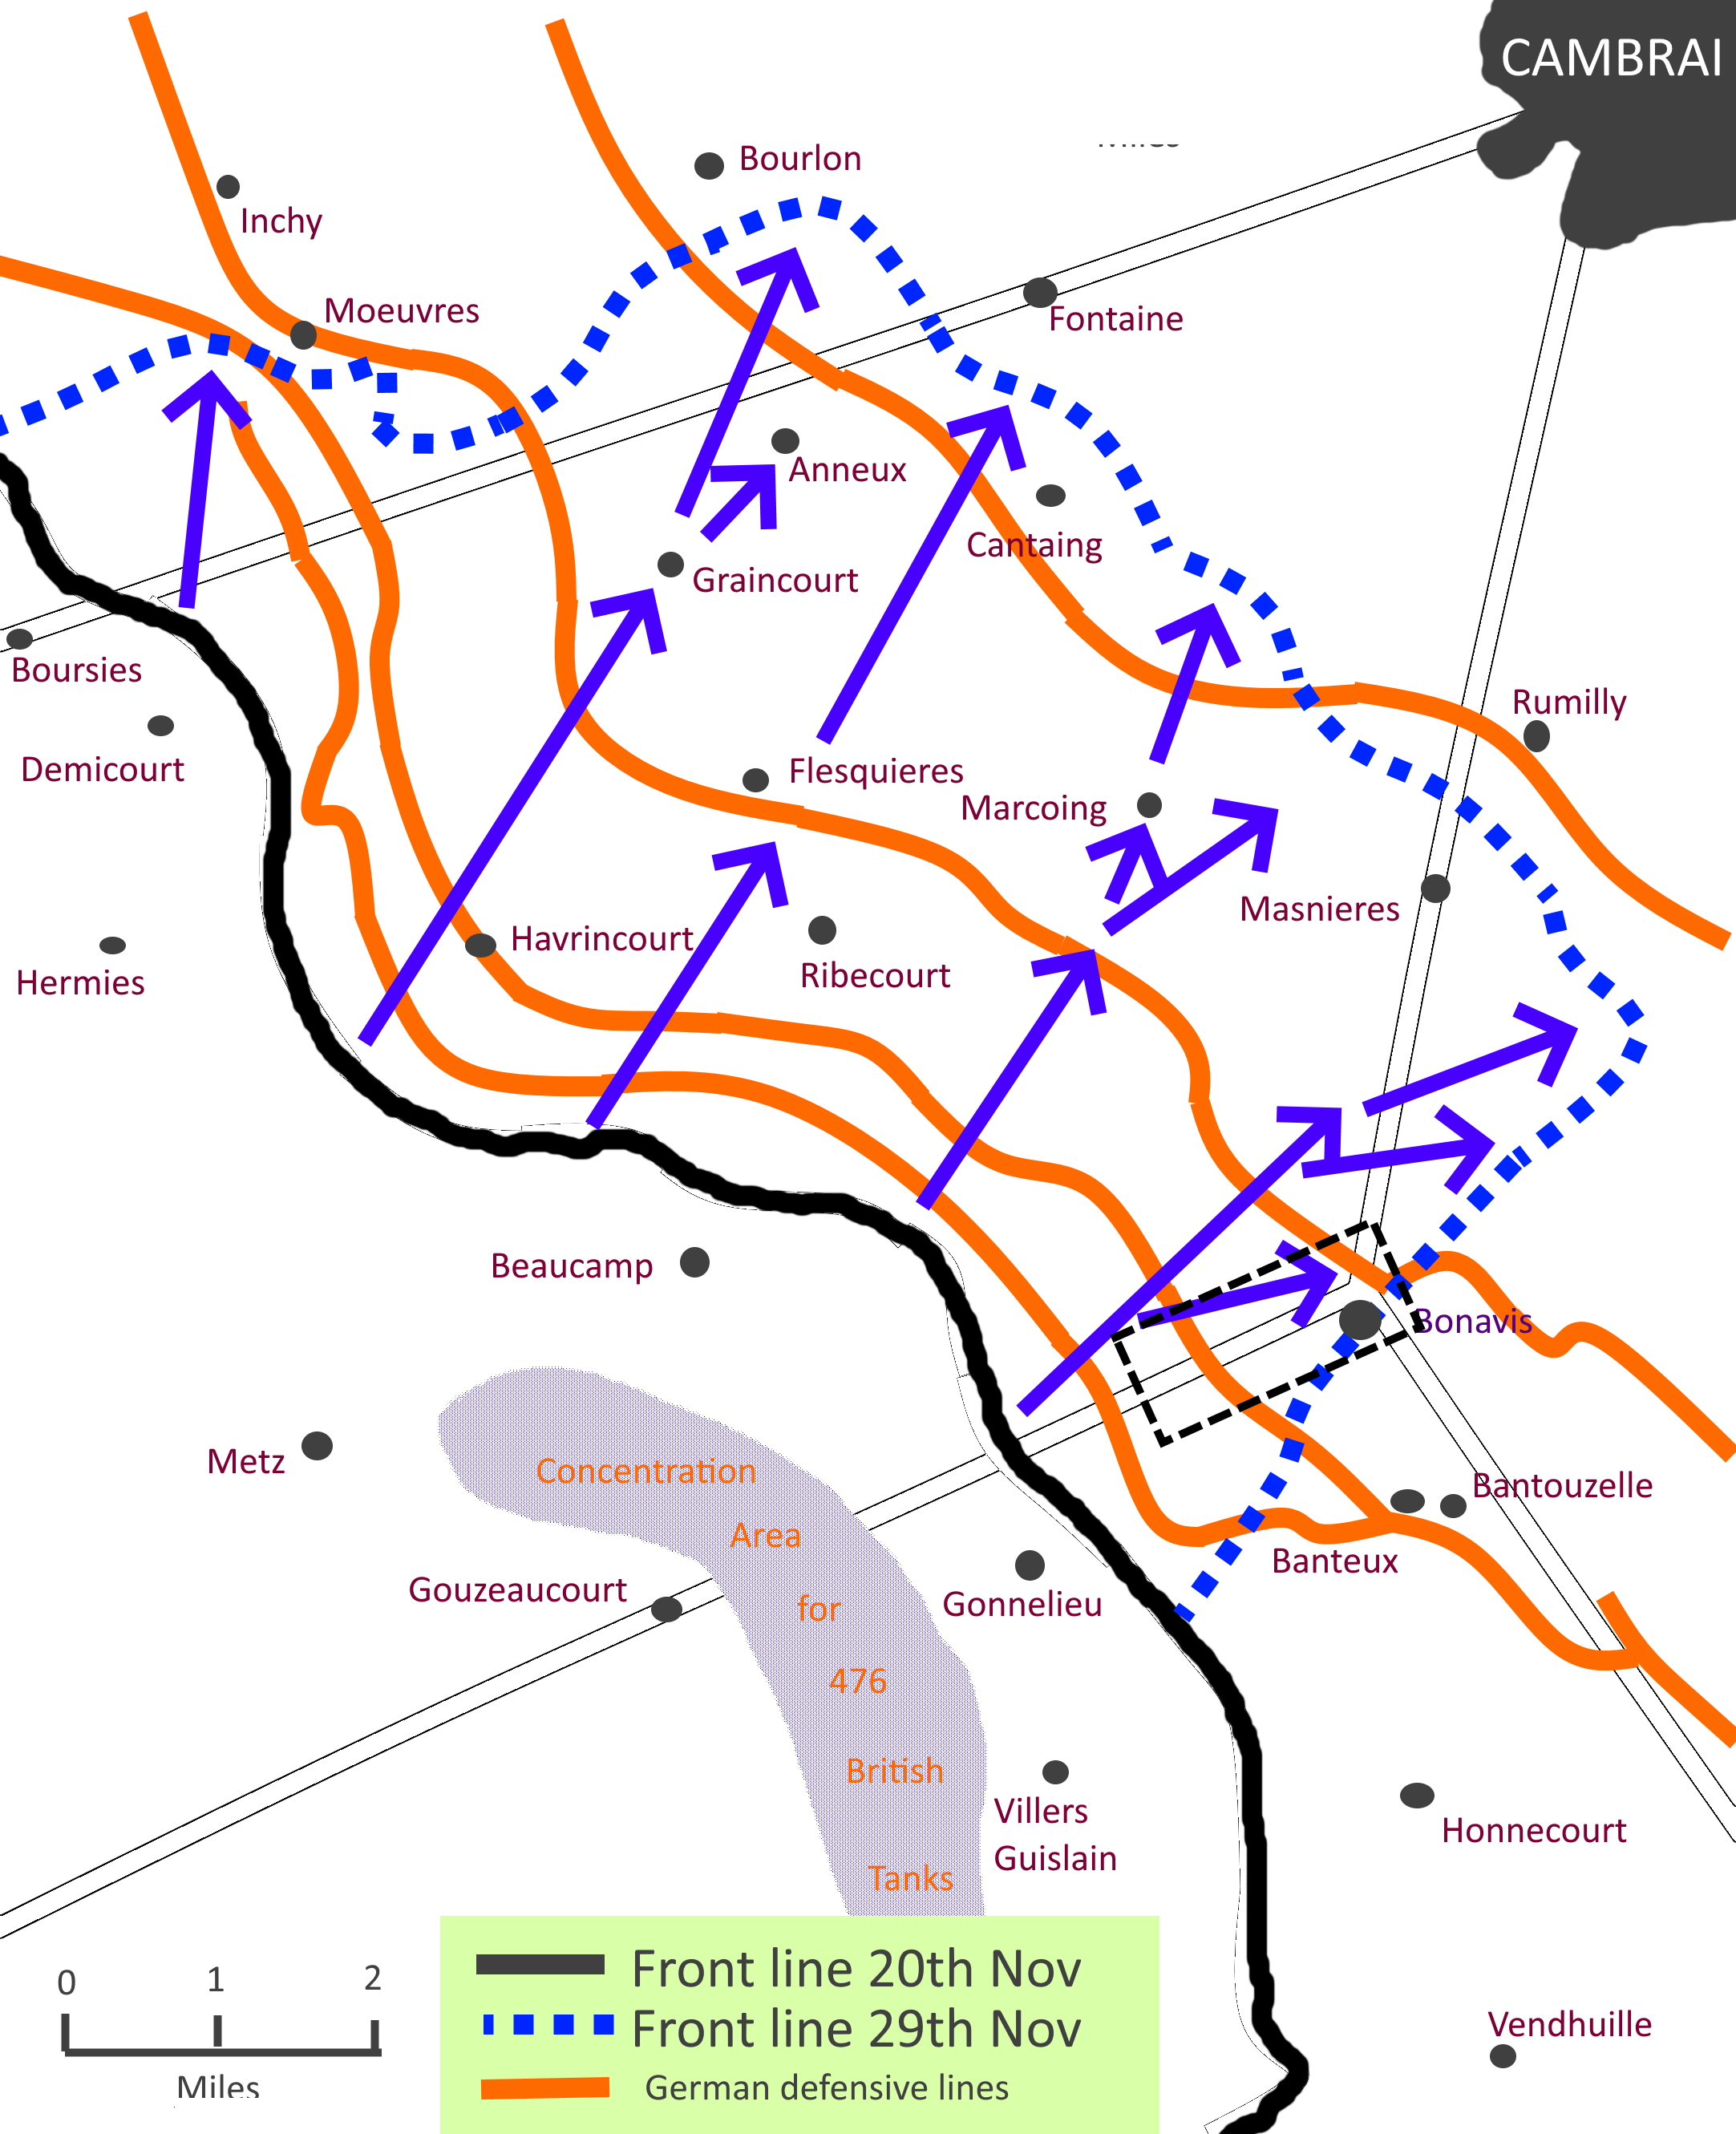 Battle of Cambrai map